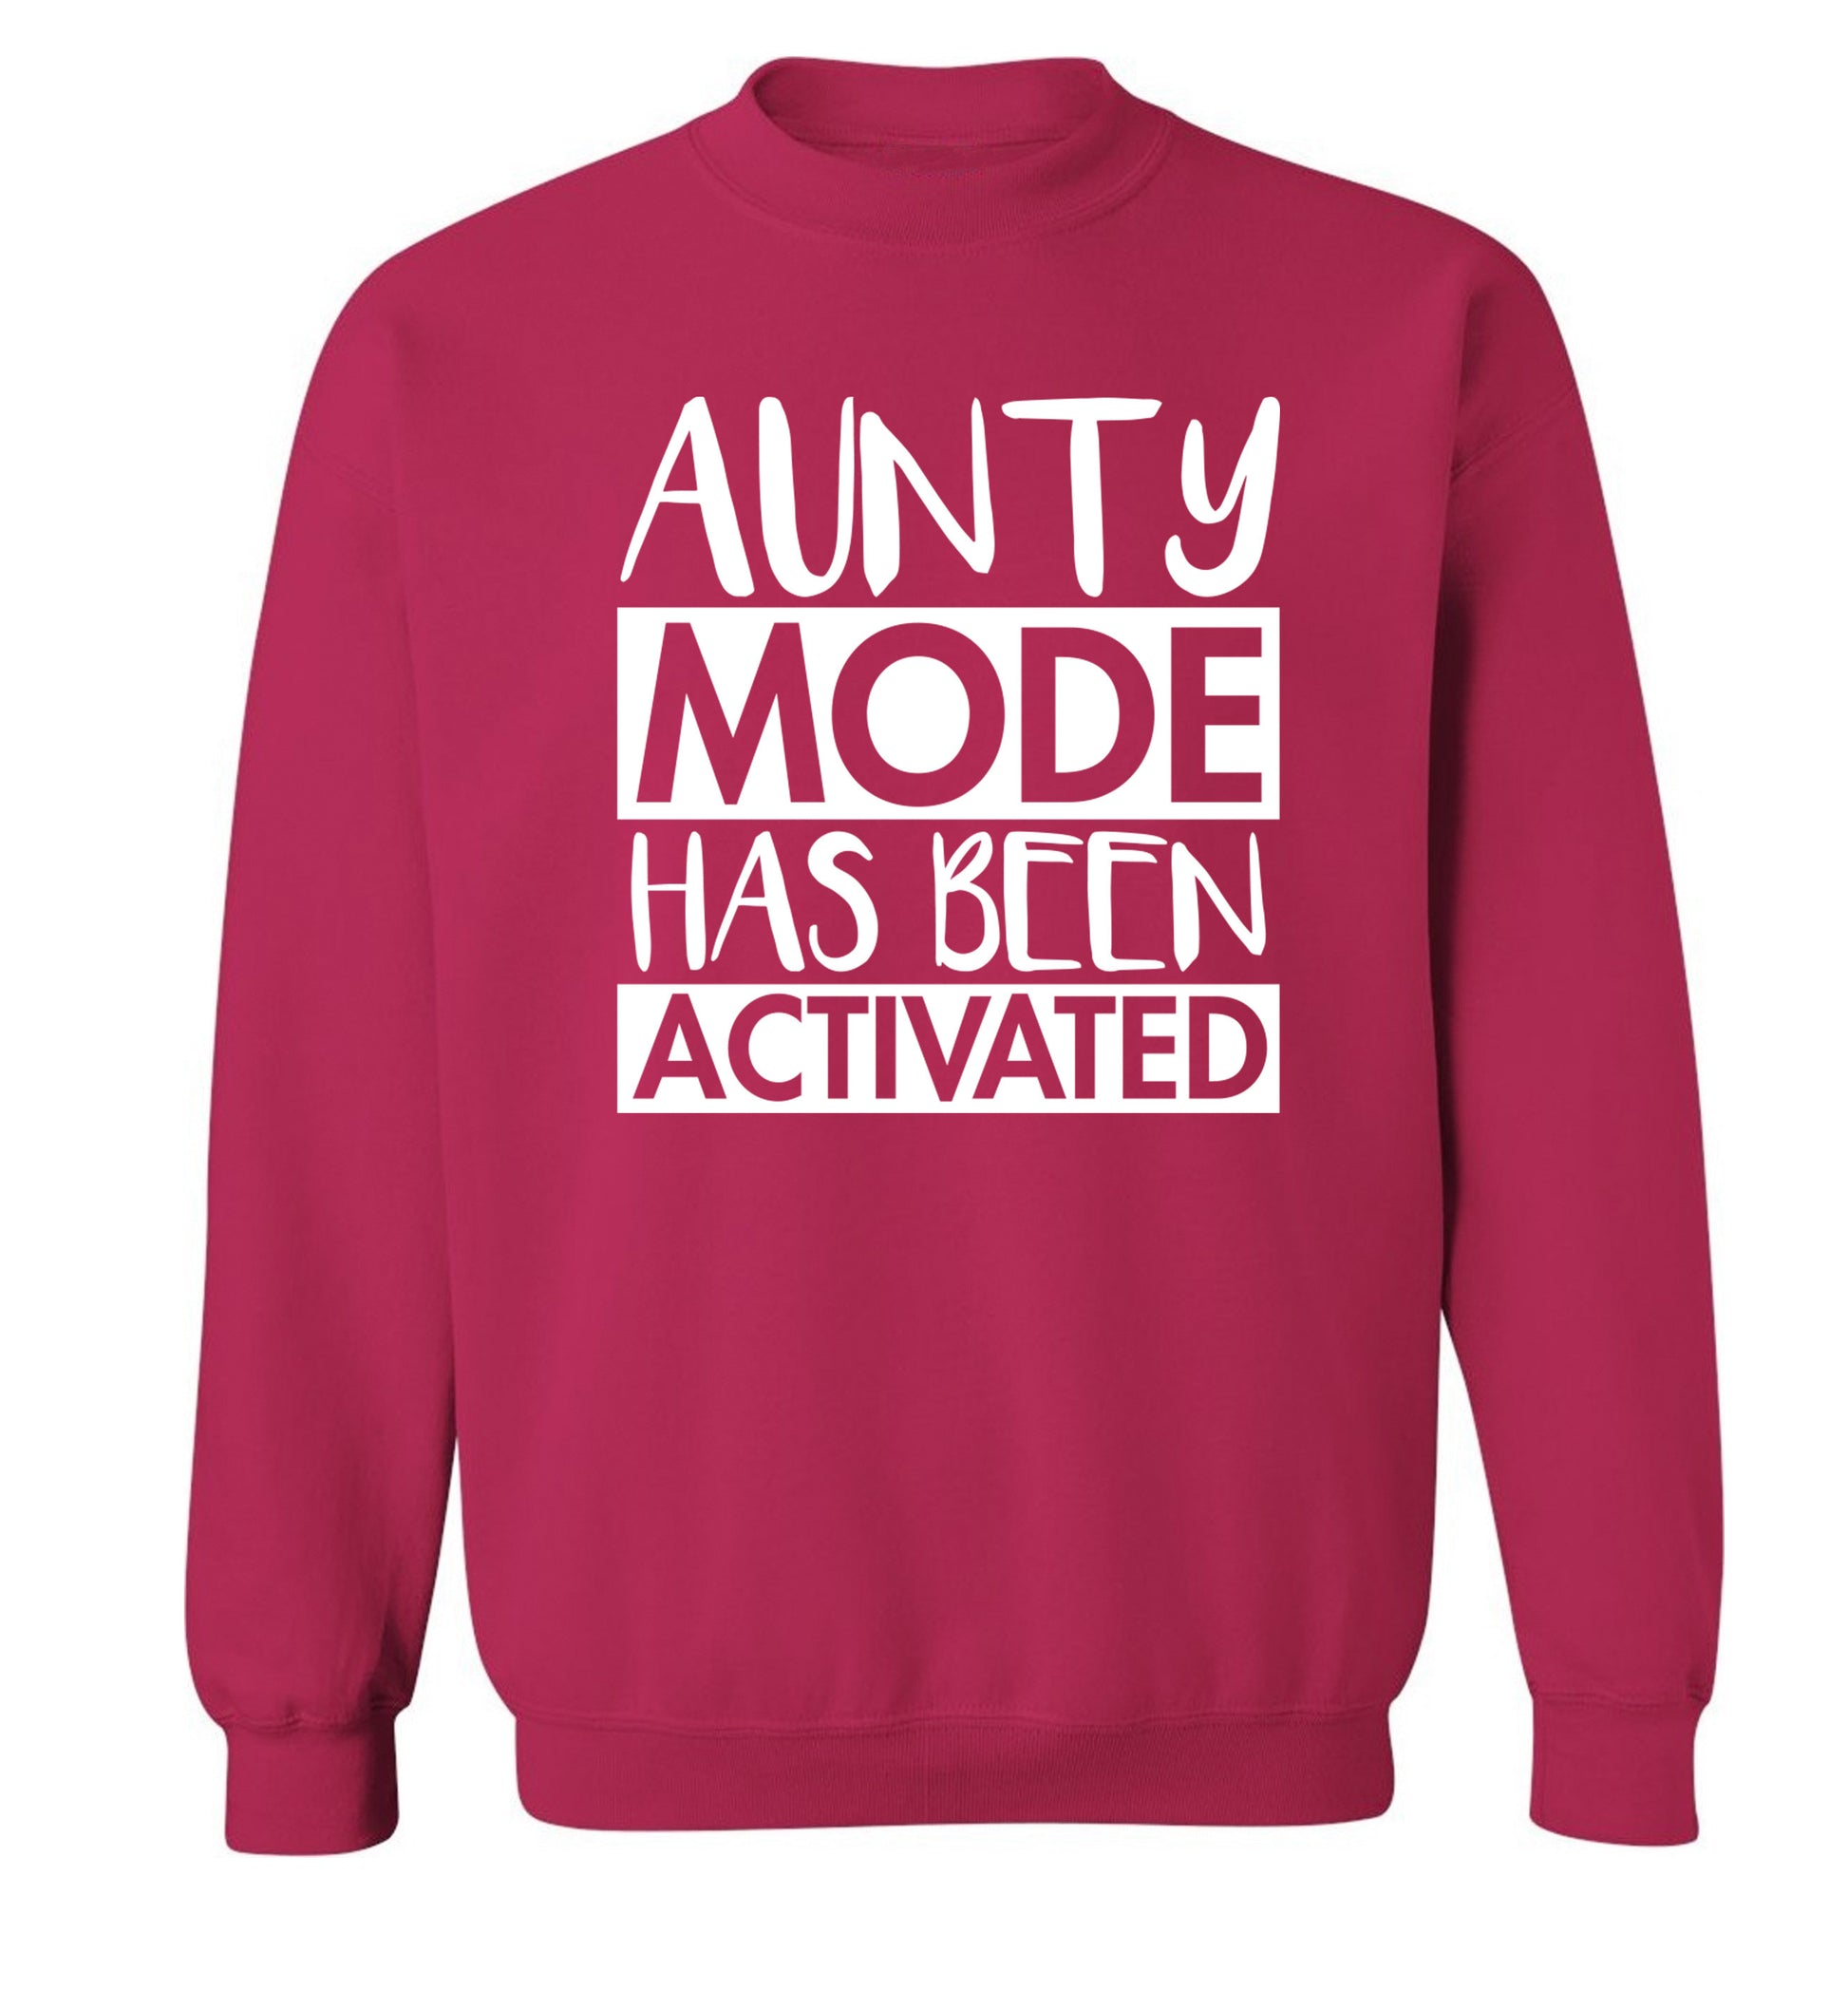 Aunty mode activated Adult's unisex pink Sweater 2XL